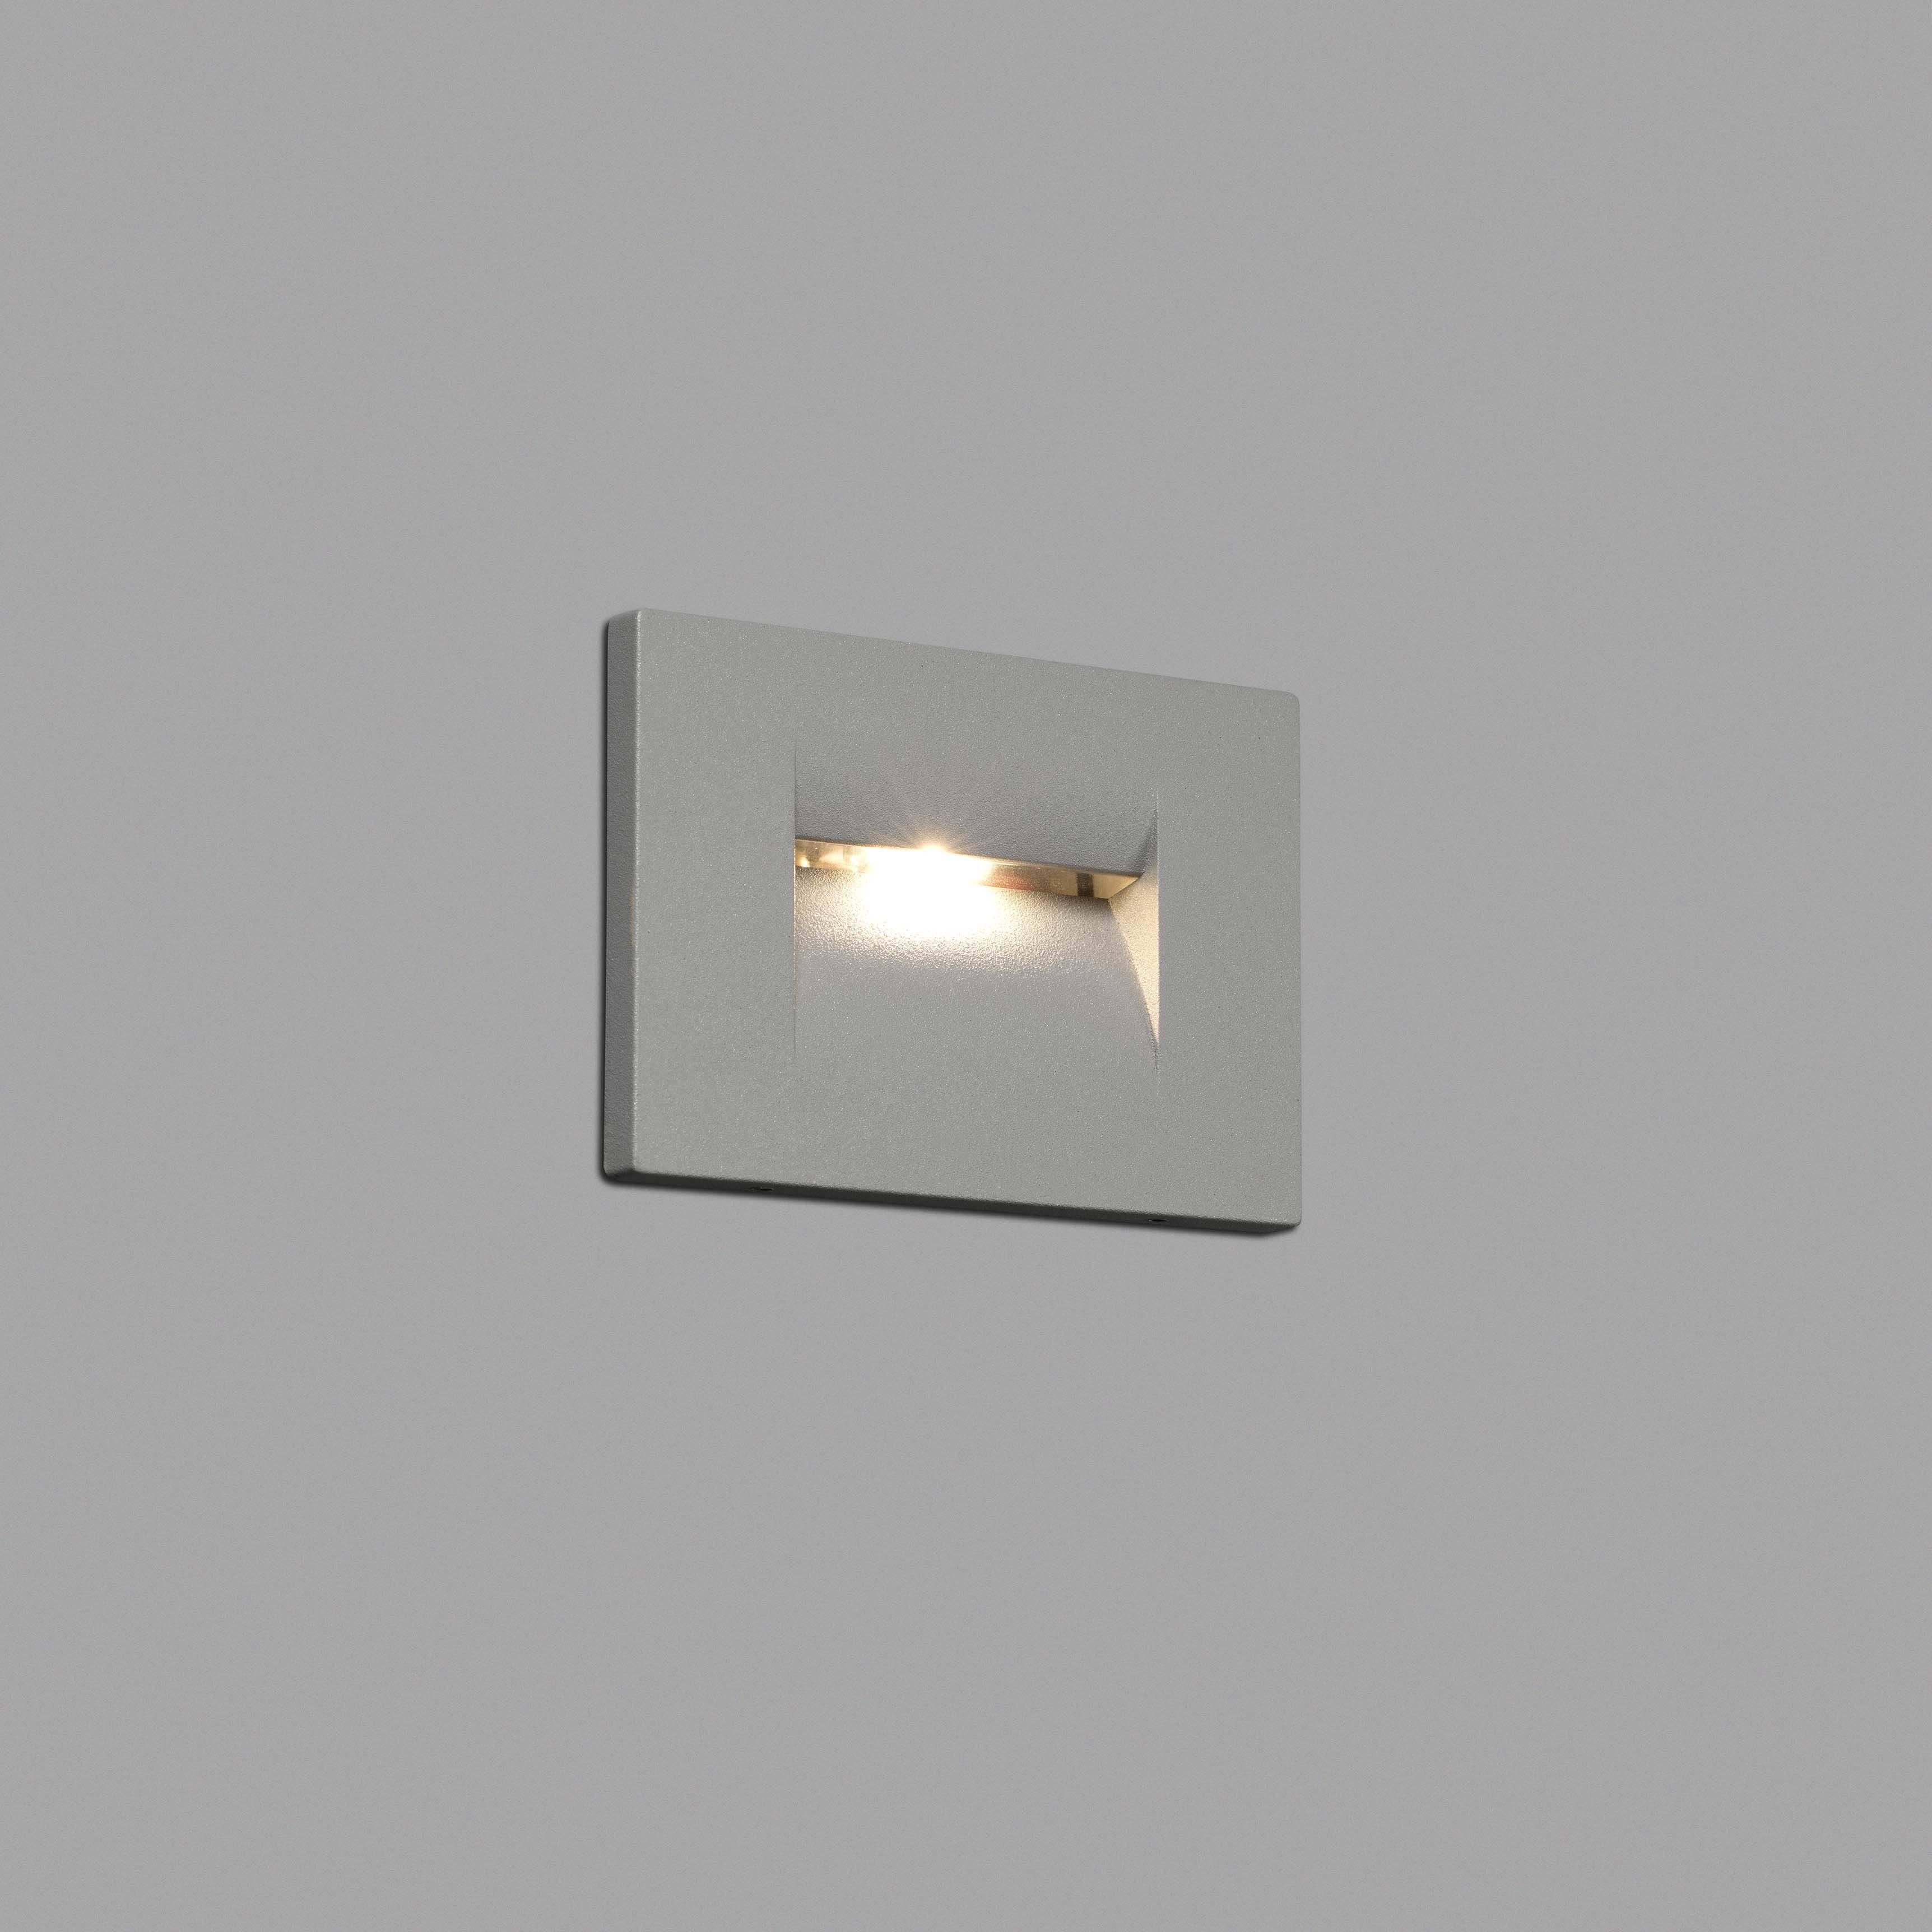 Horus LED Outdoor Recessed Wall Light Grey IP65